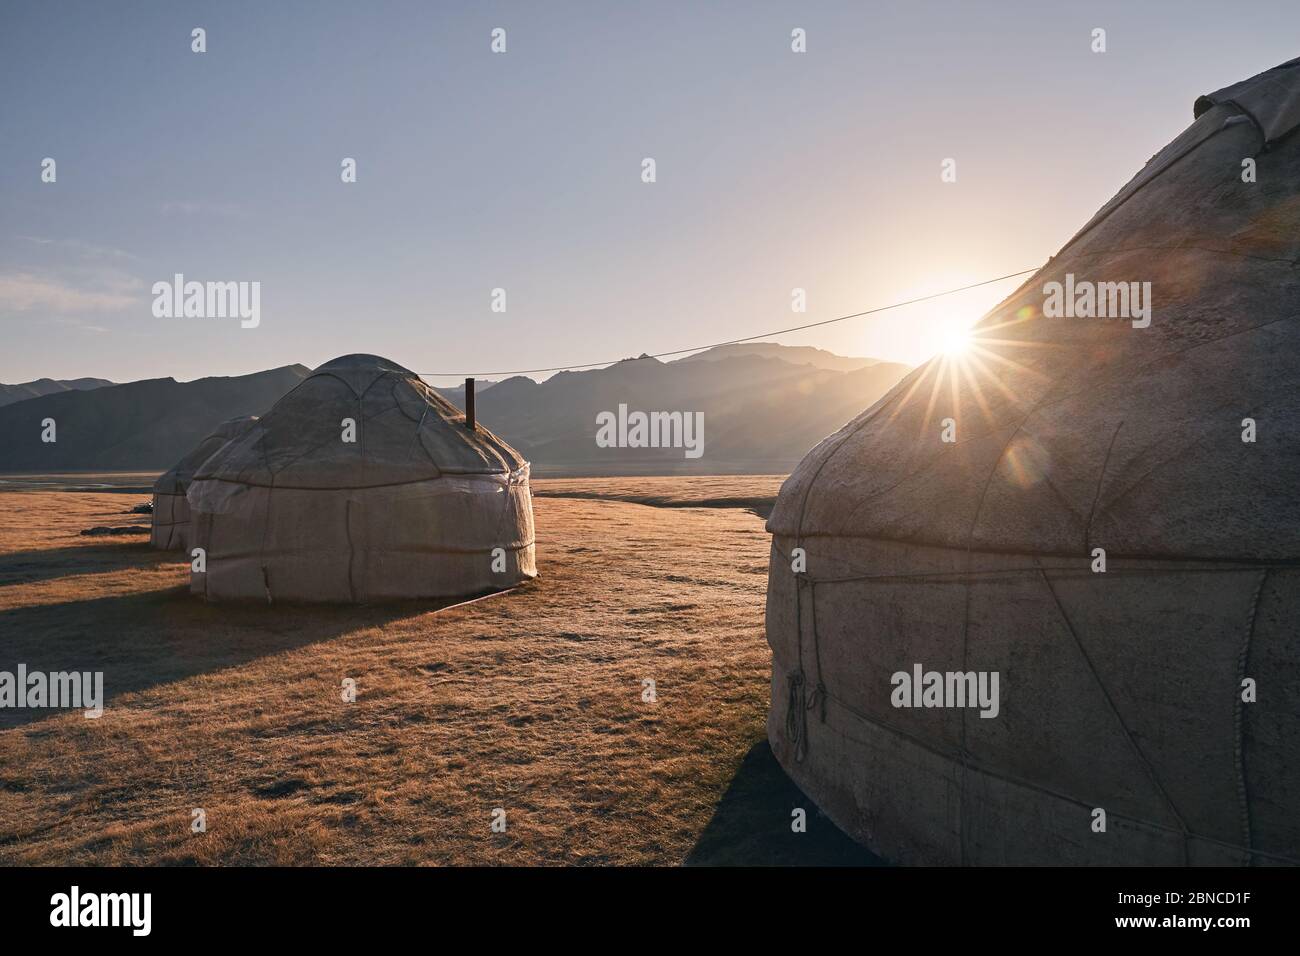 Yurt nomadic houses camp at mountain valley at sunrise in Central Asia Stock Photo